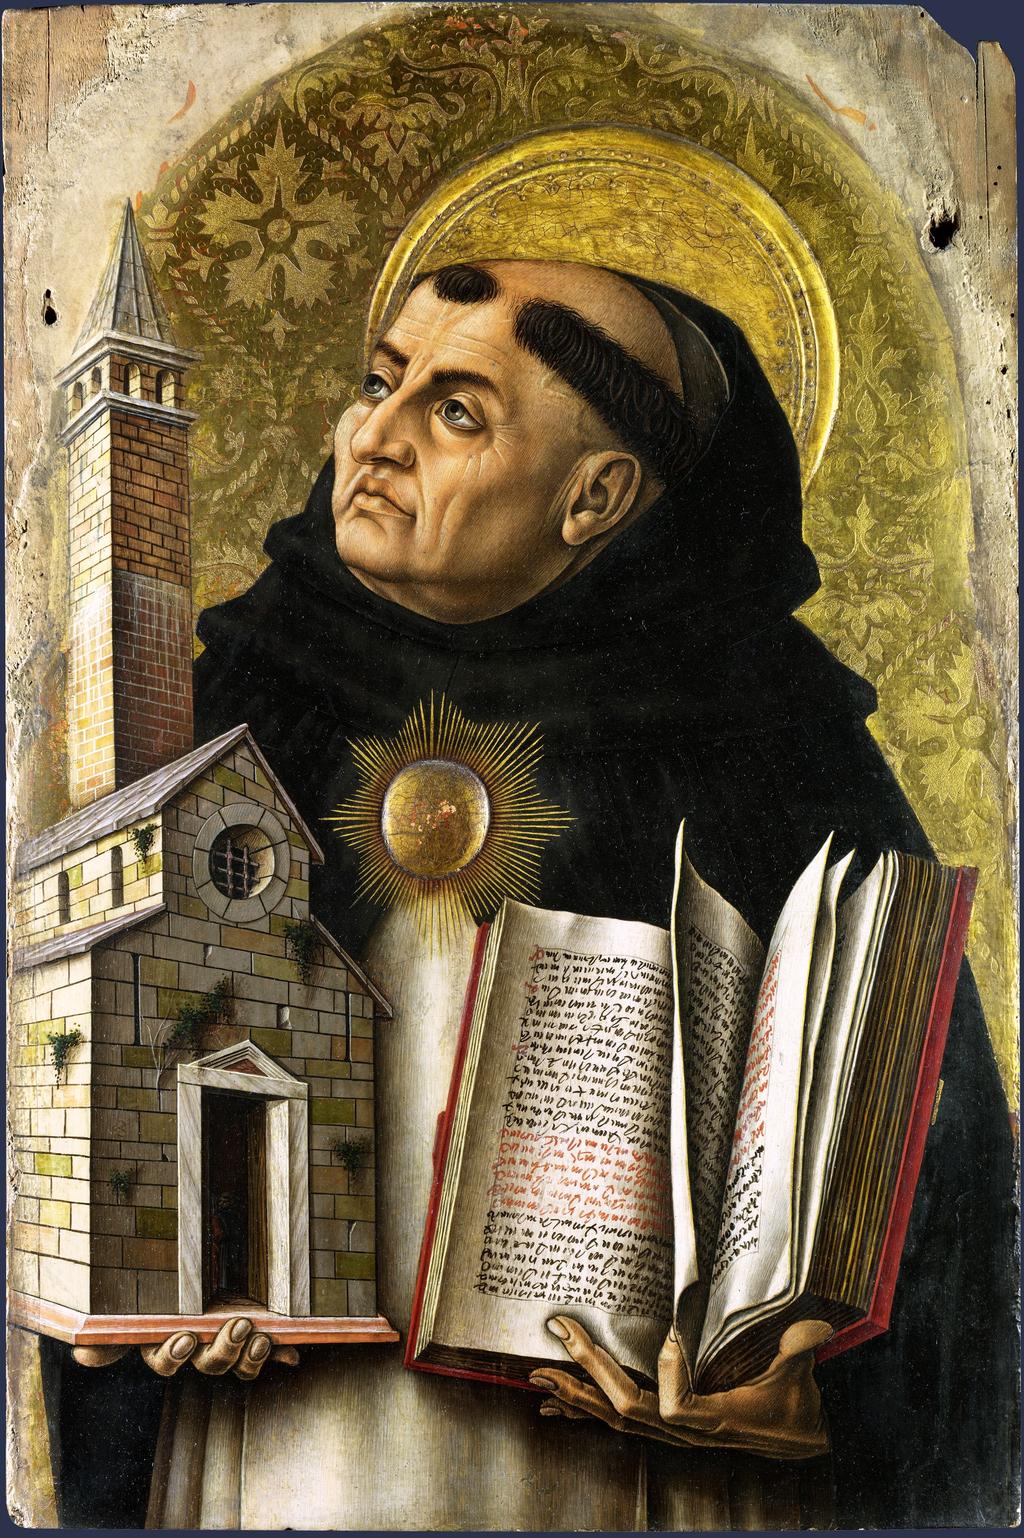 St. Thomas Aquinas St. Thomas Aquinas was the youngest child of a noble family in Italy. His family expected him to join a monastery and become an abbot.